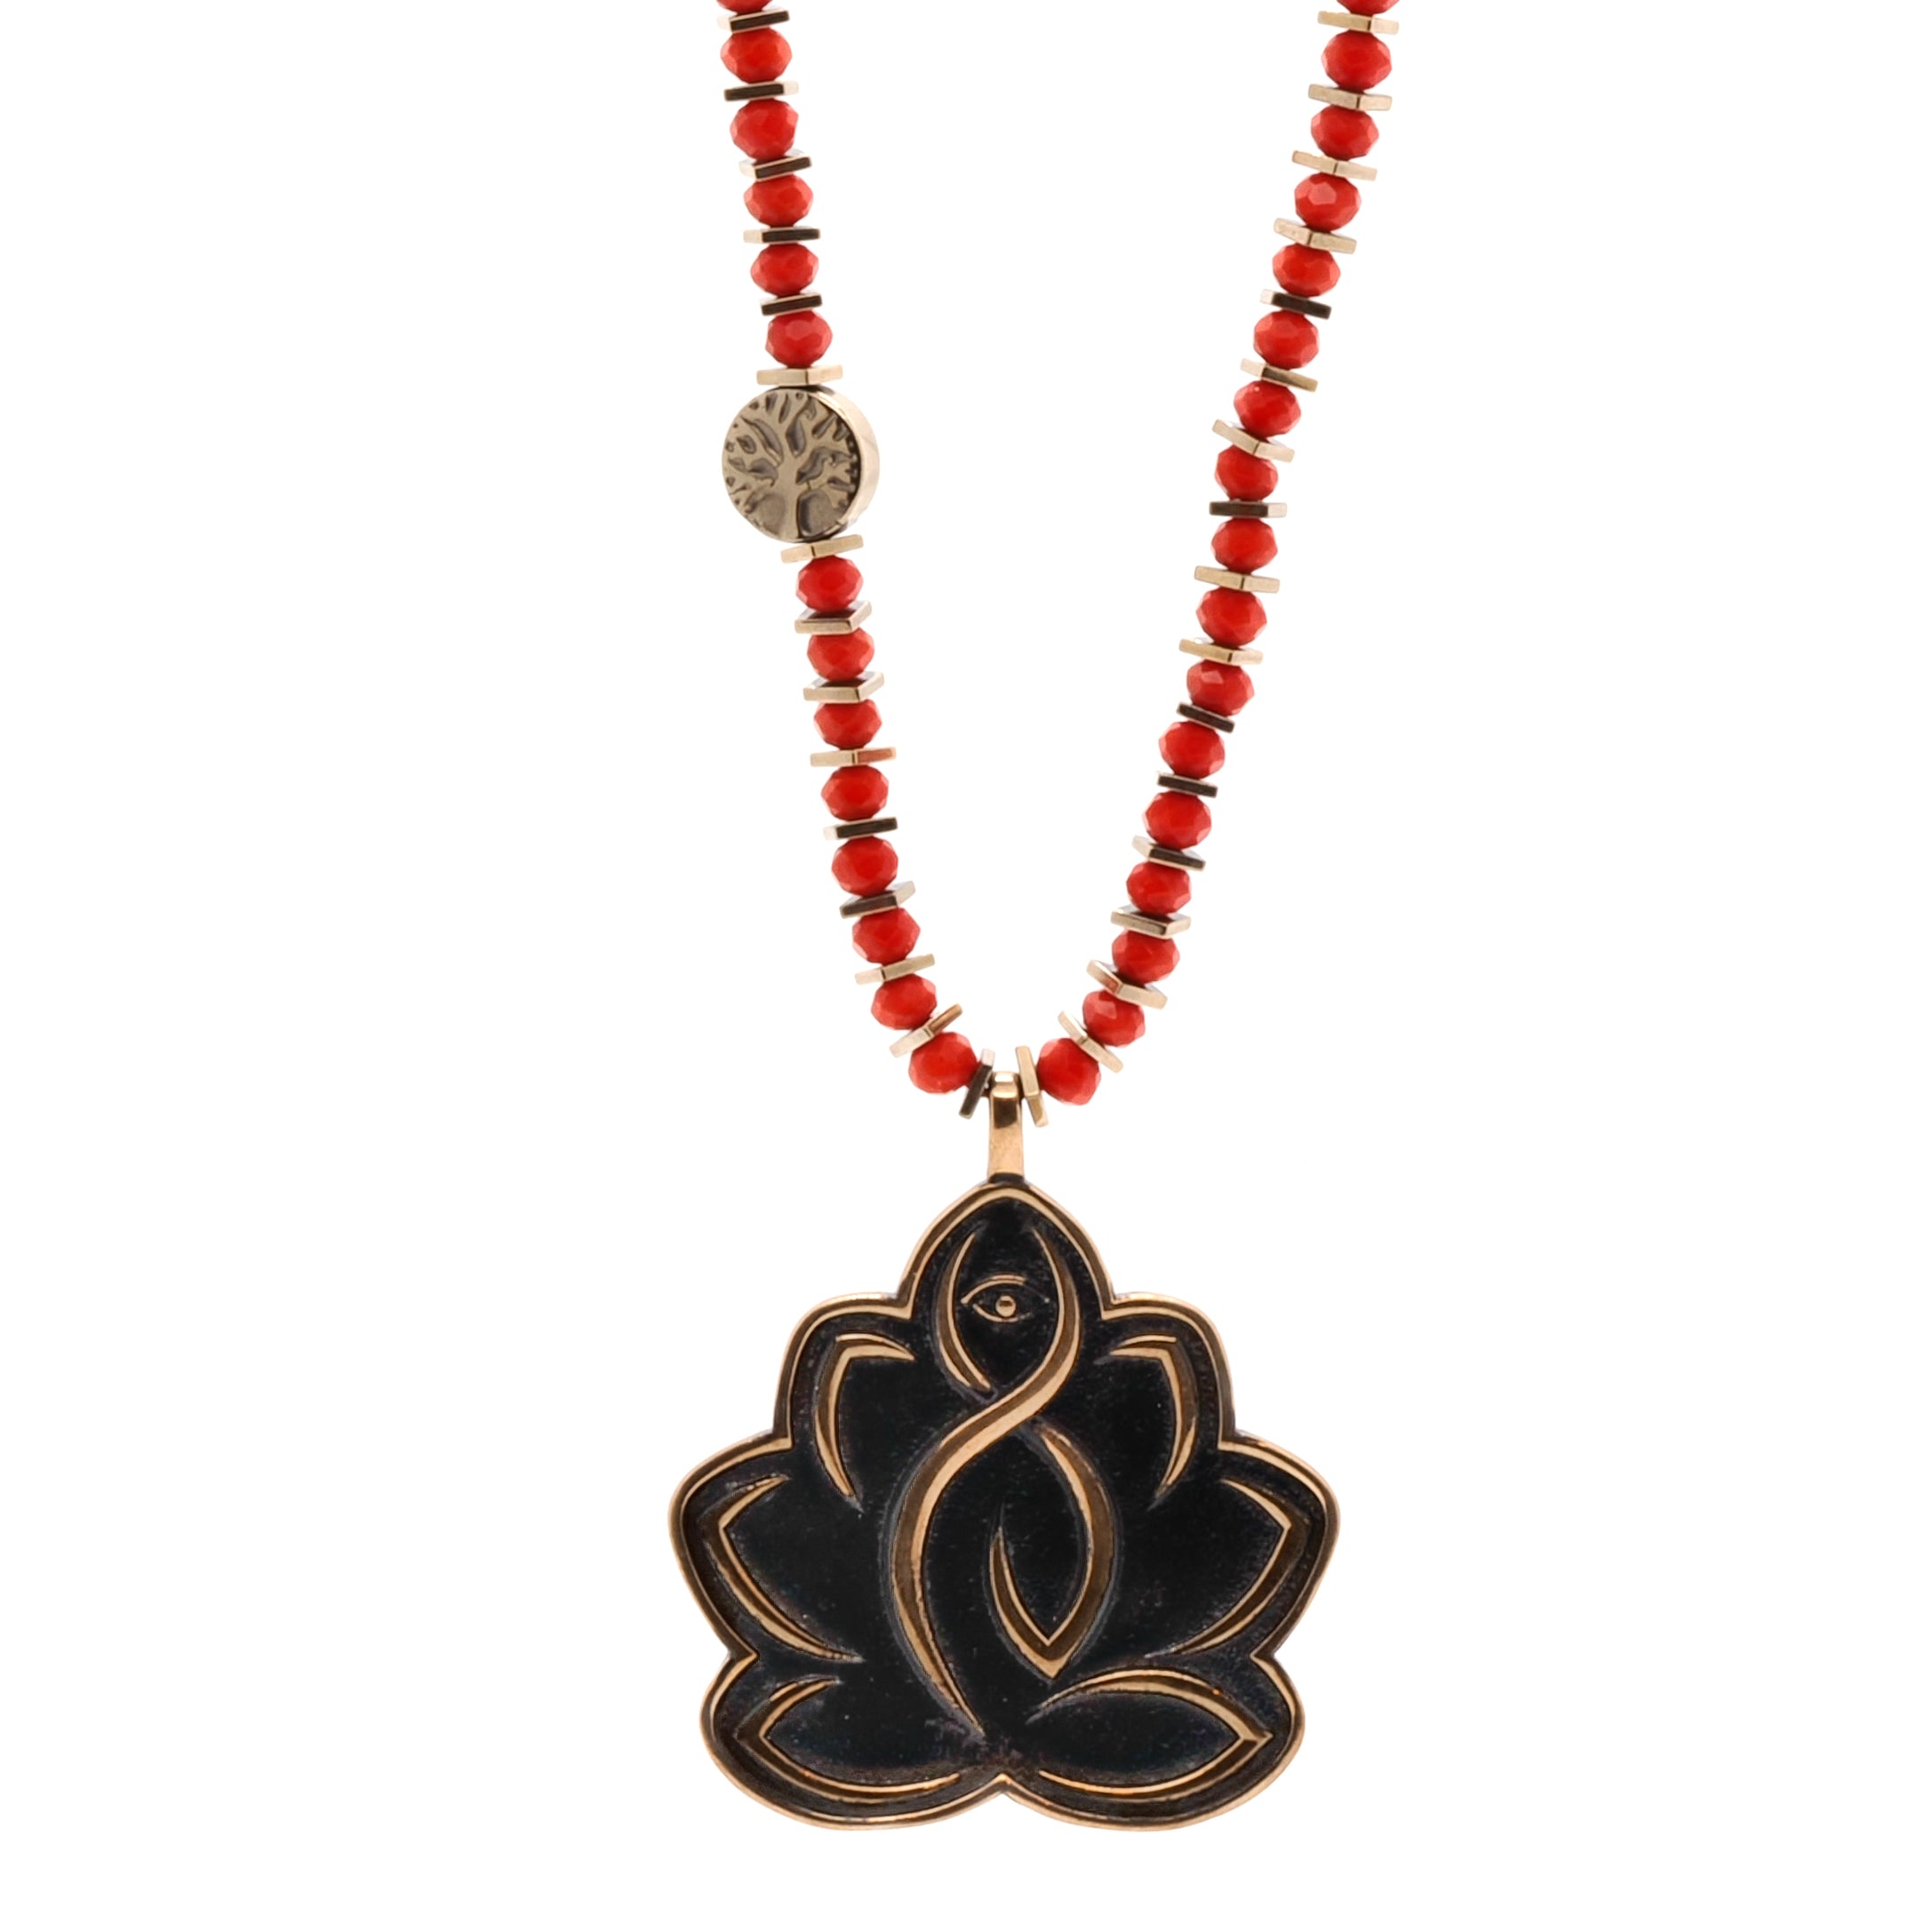 Buddha's Wisdom Necklace featuring a lotus pendant and powerful words of wisdom